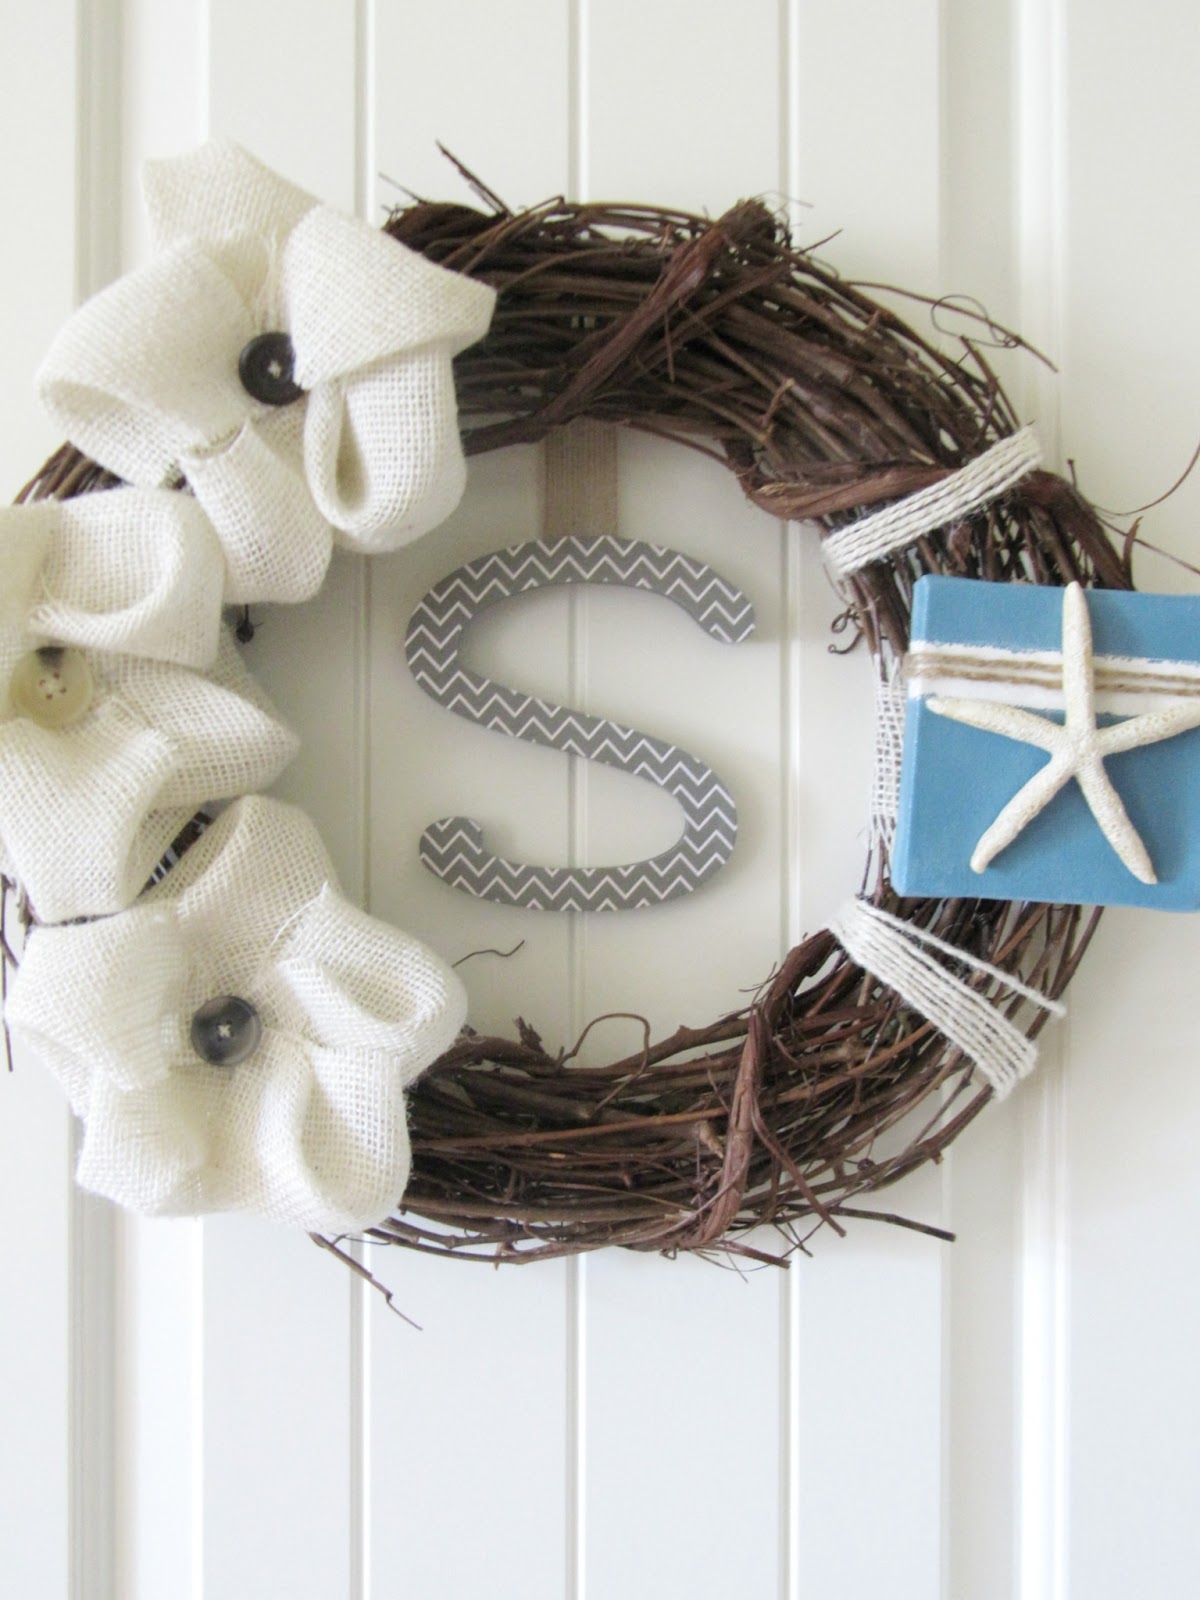 Adorn -A- Wreath  *Special 20% off Coupon Code just for you!